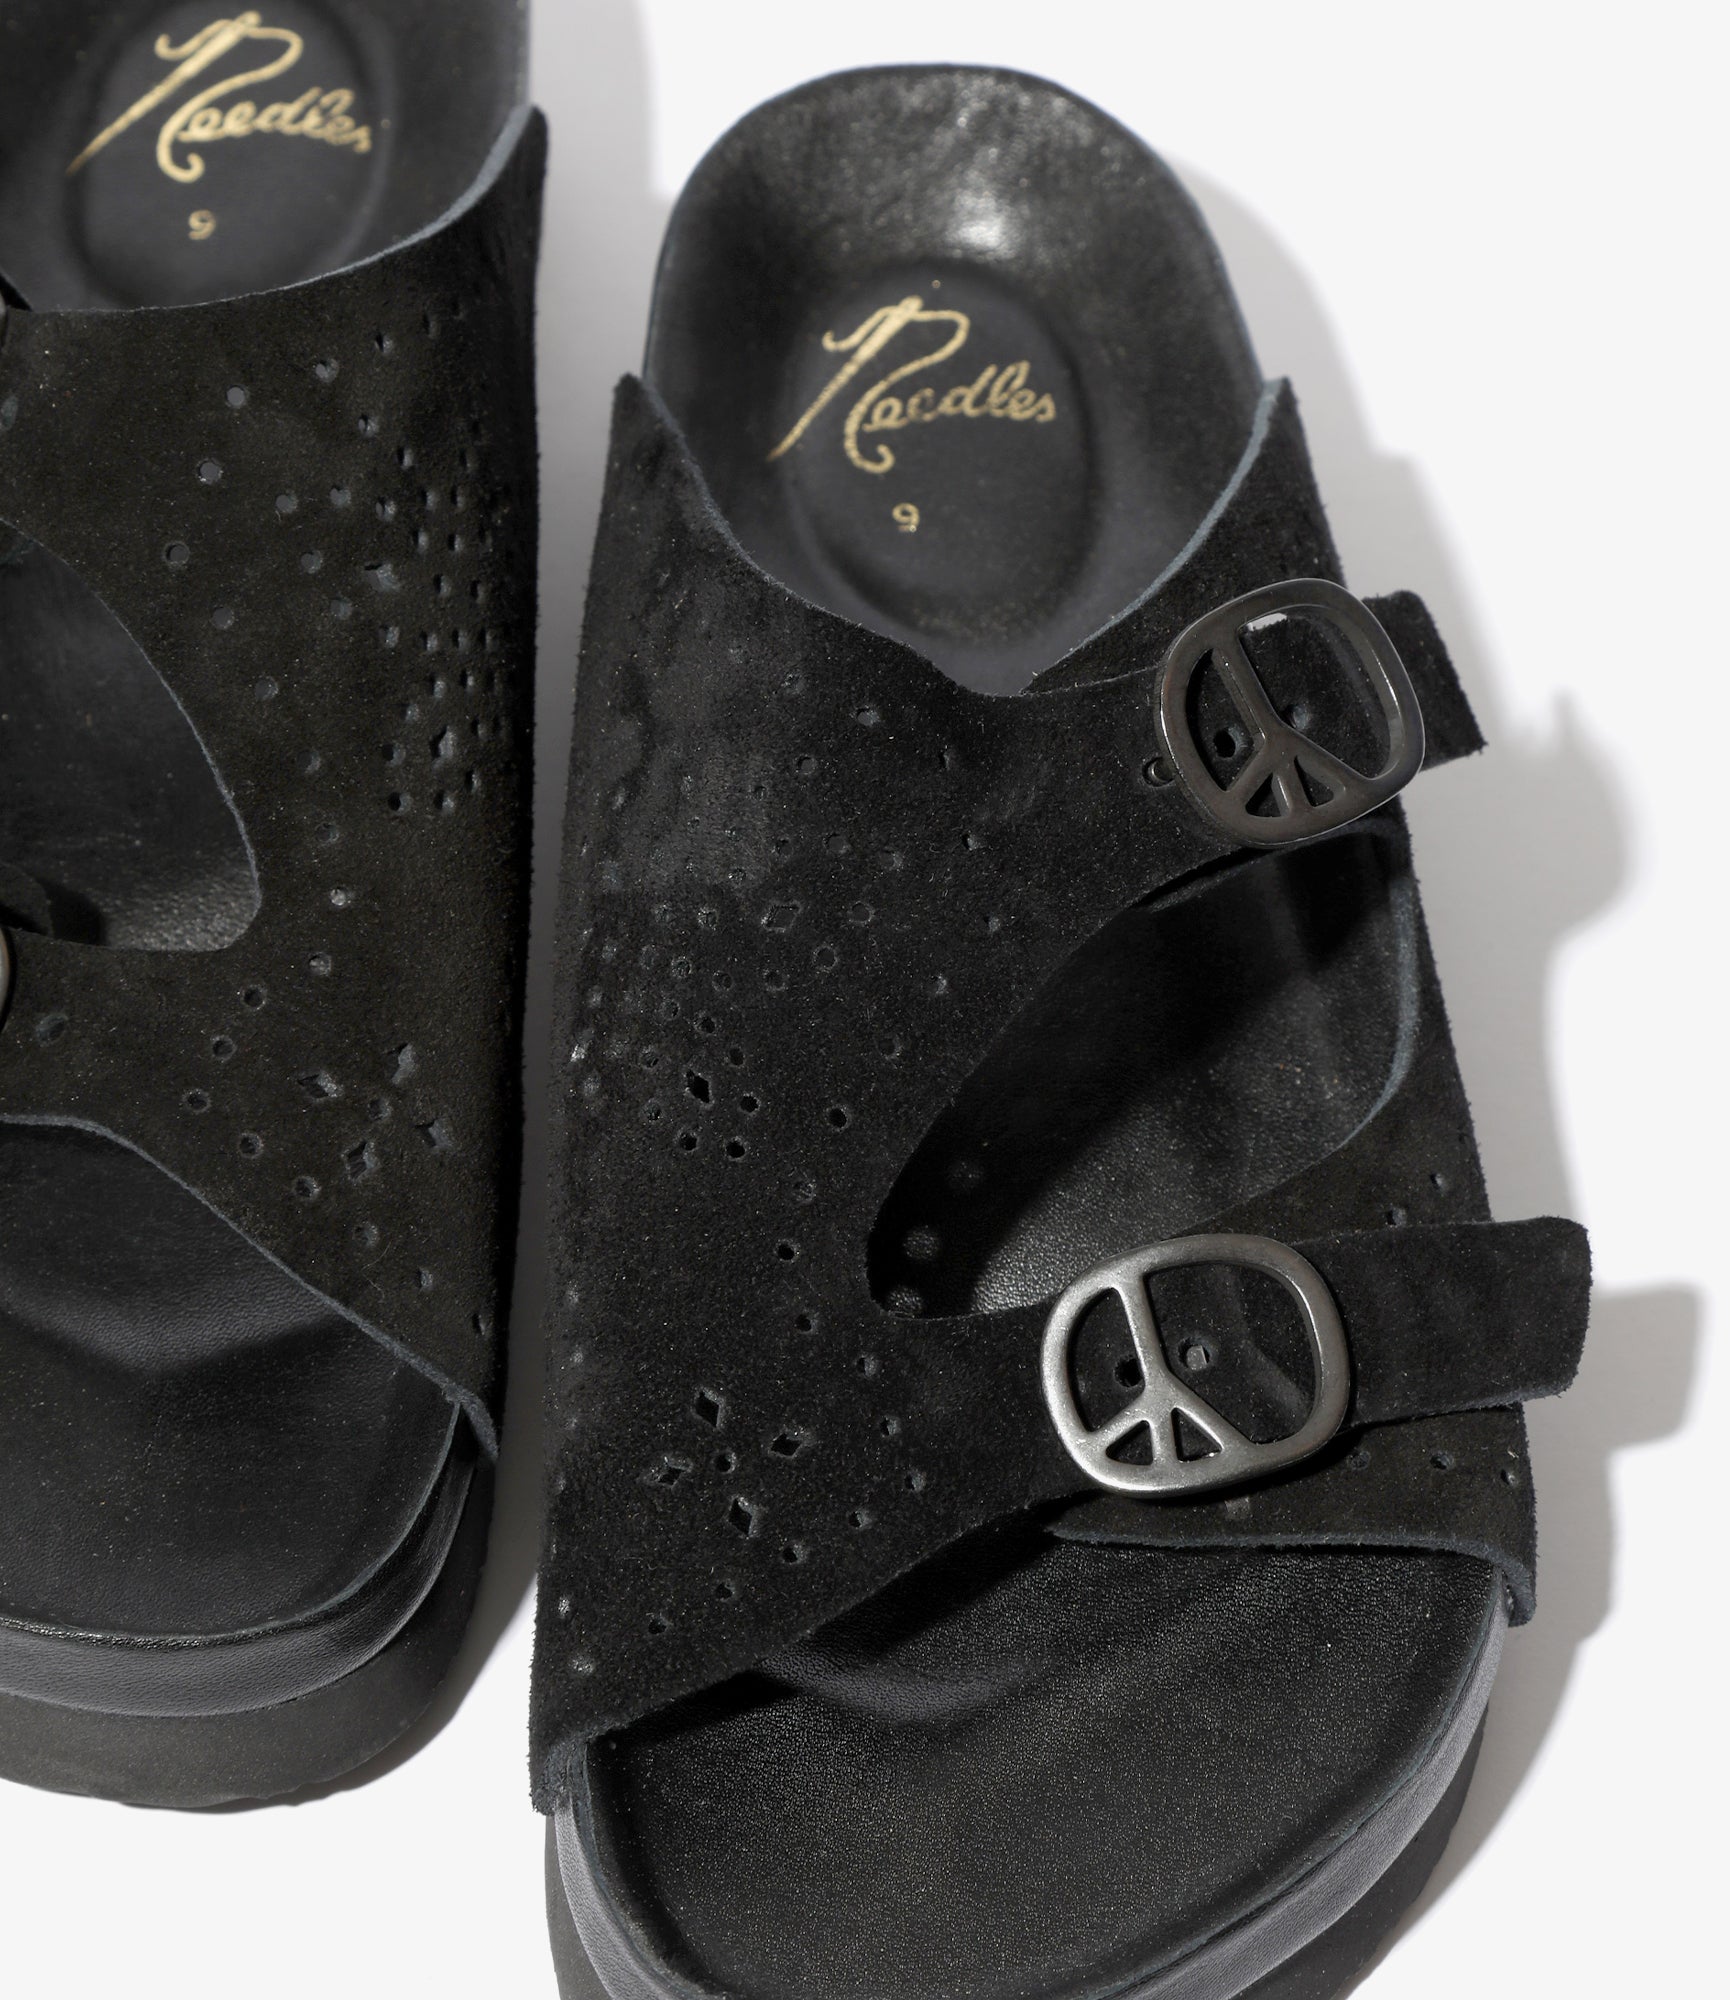 Double Strap Sandal - Black - Suede Leather